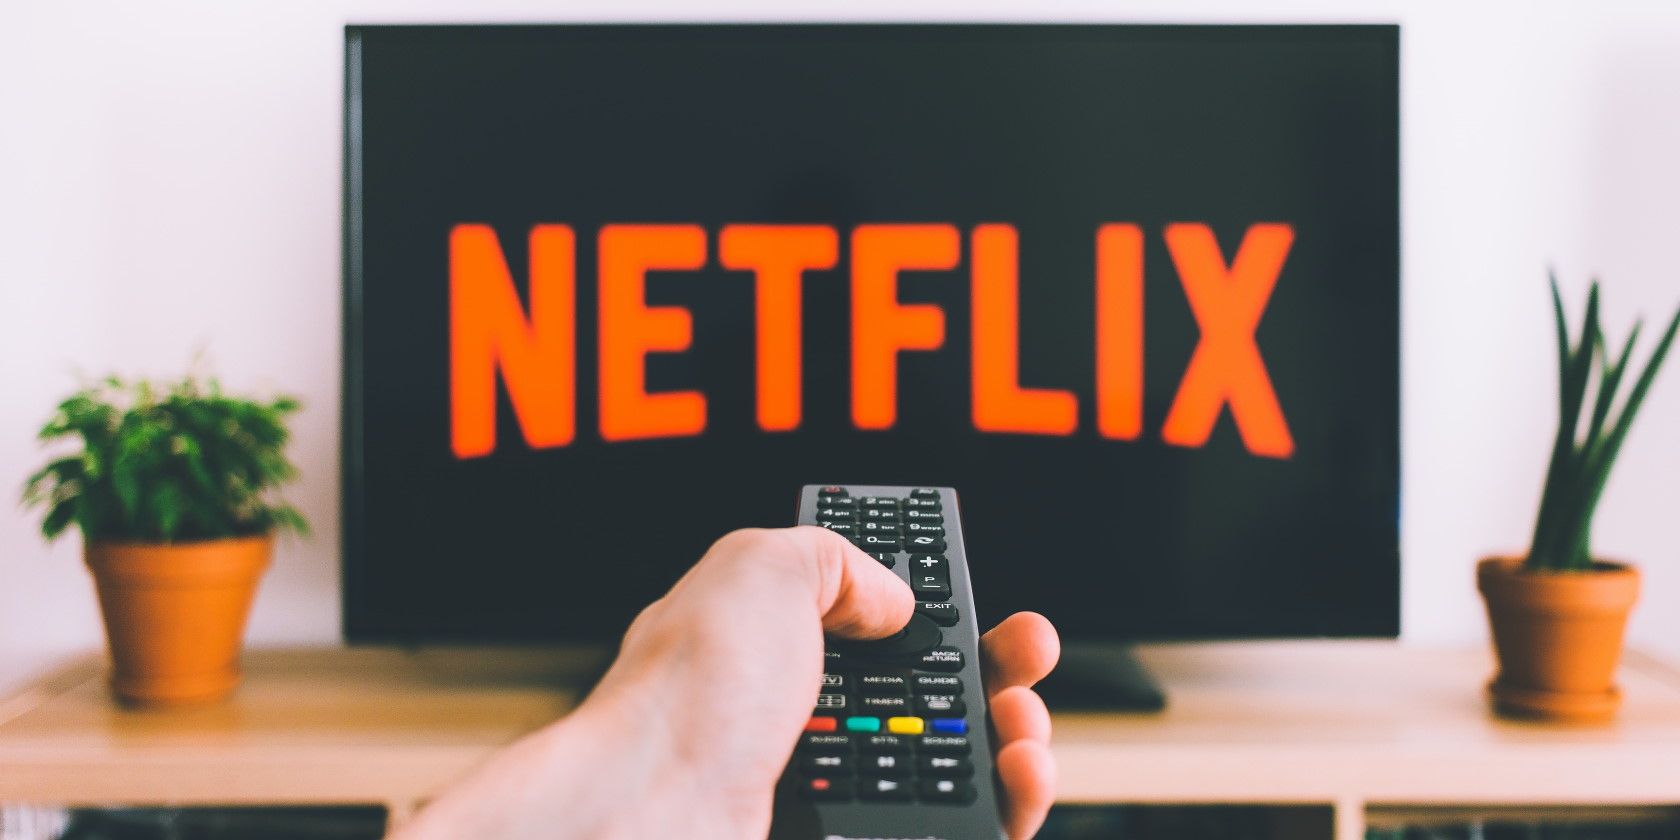 person holding remote and pointing in at TV showing Netflix streaming service